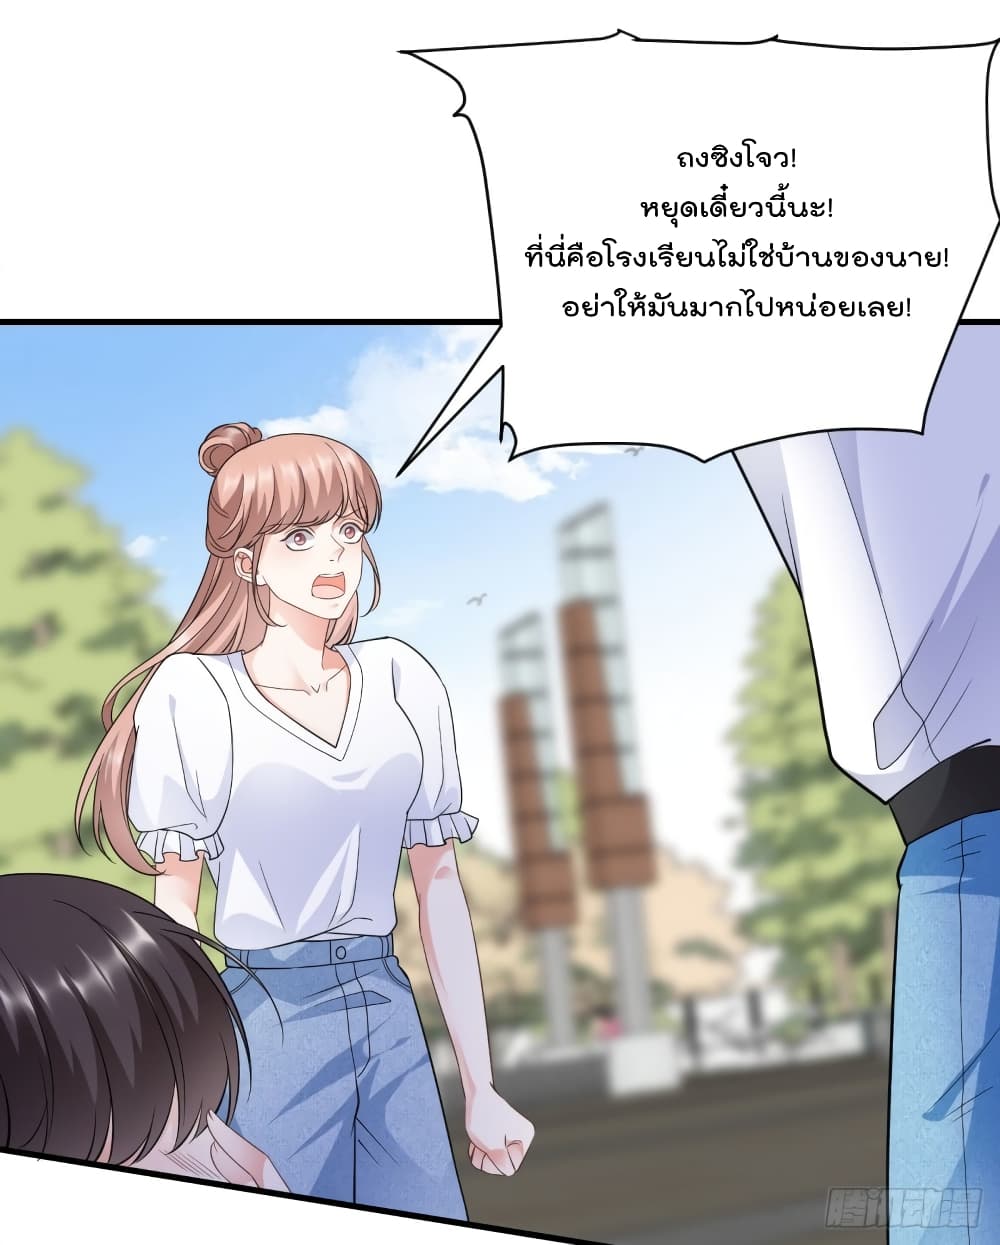 What Can the Eldest Lady Have คุณหนูใหญ่ ทำไมคุณร้ายอย่างนี้ 29-29